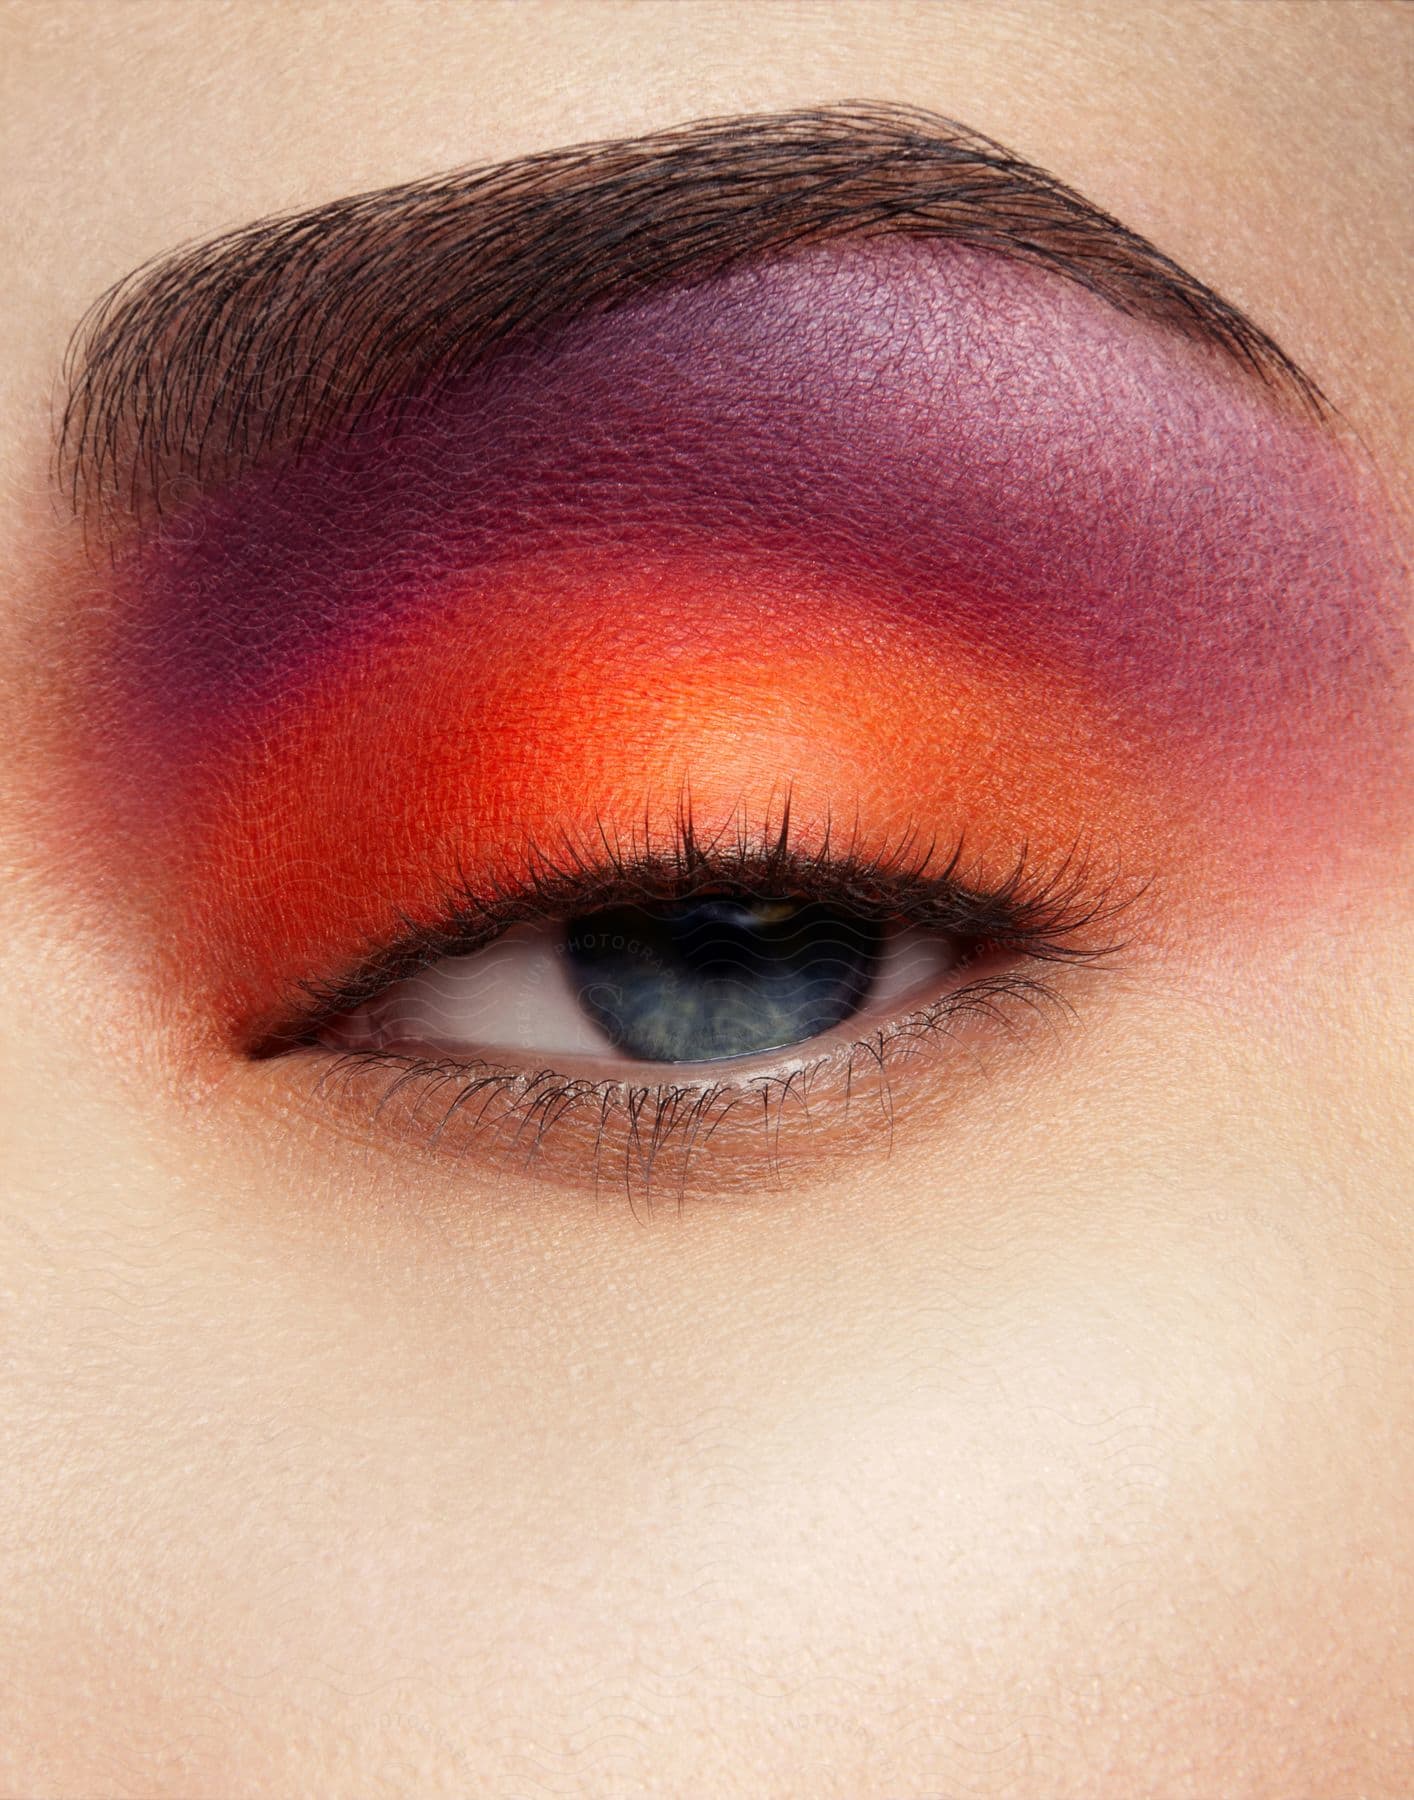 Close up of eye with orange and purple eye makeup